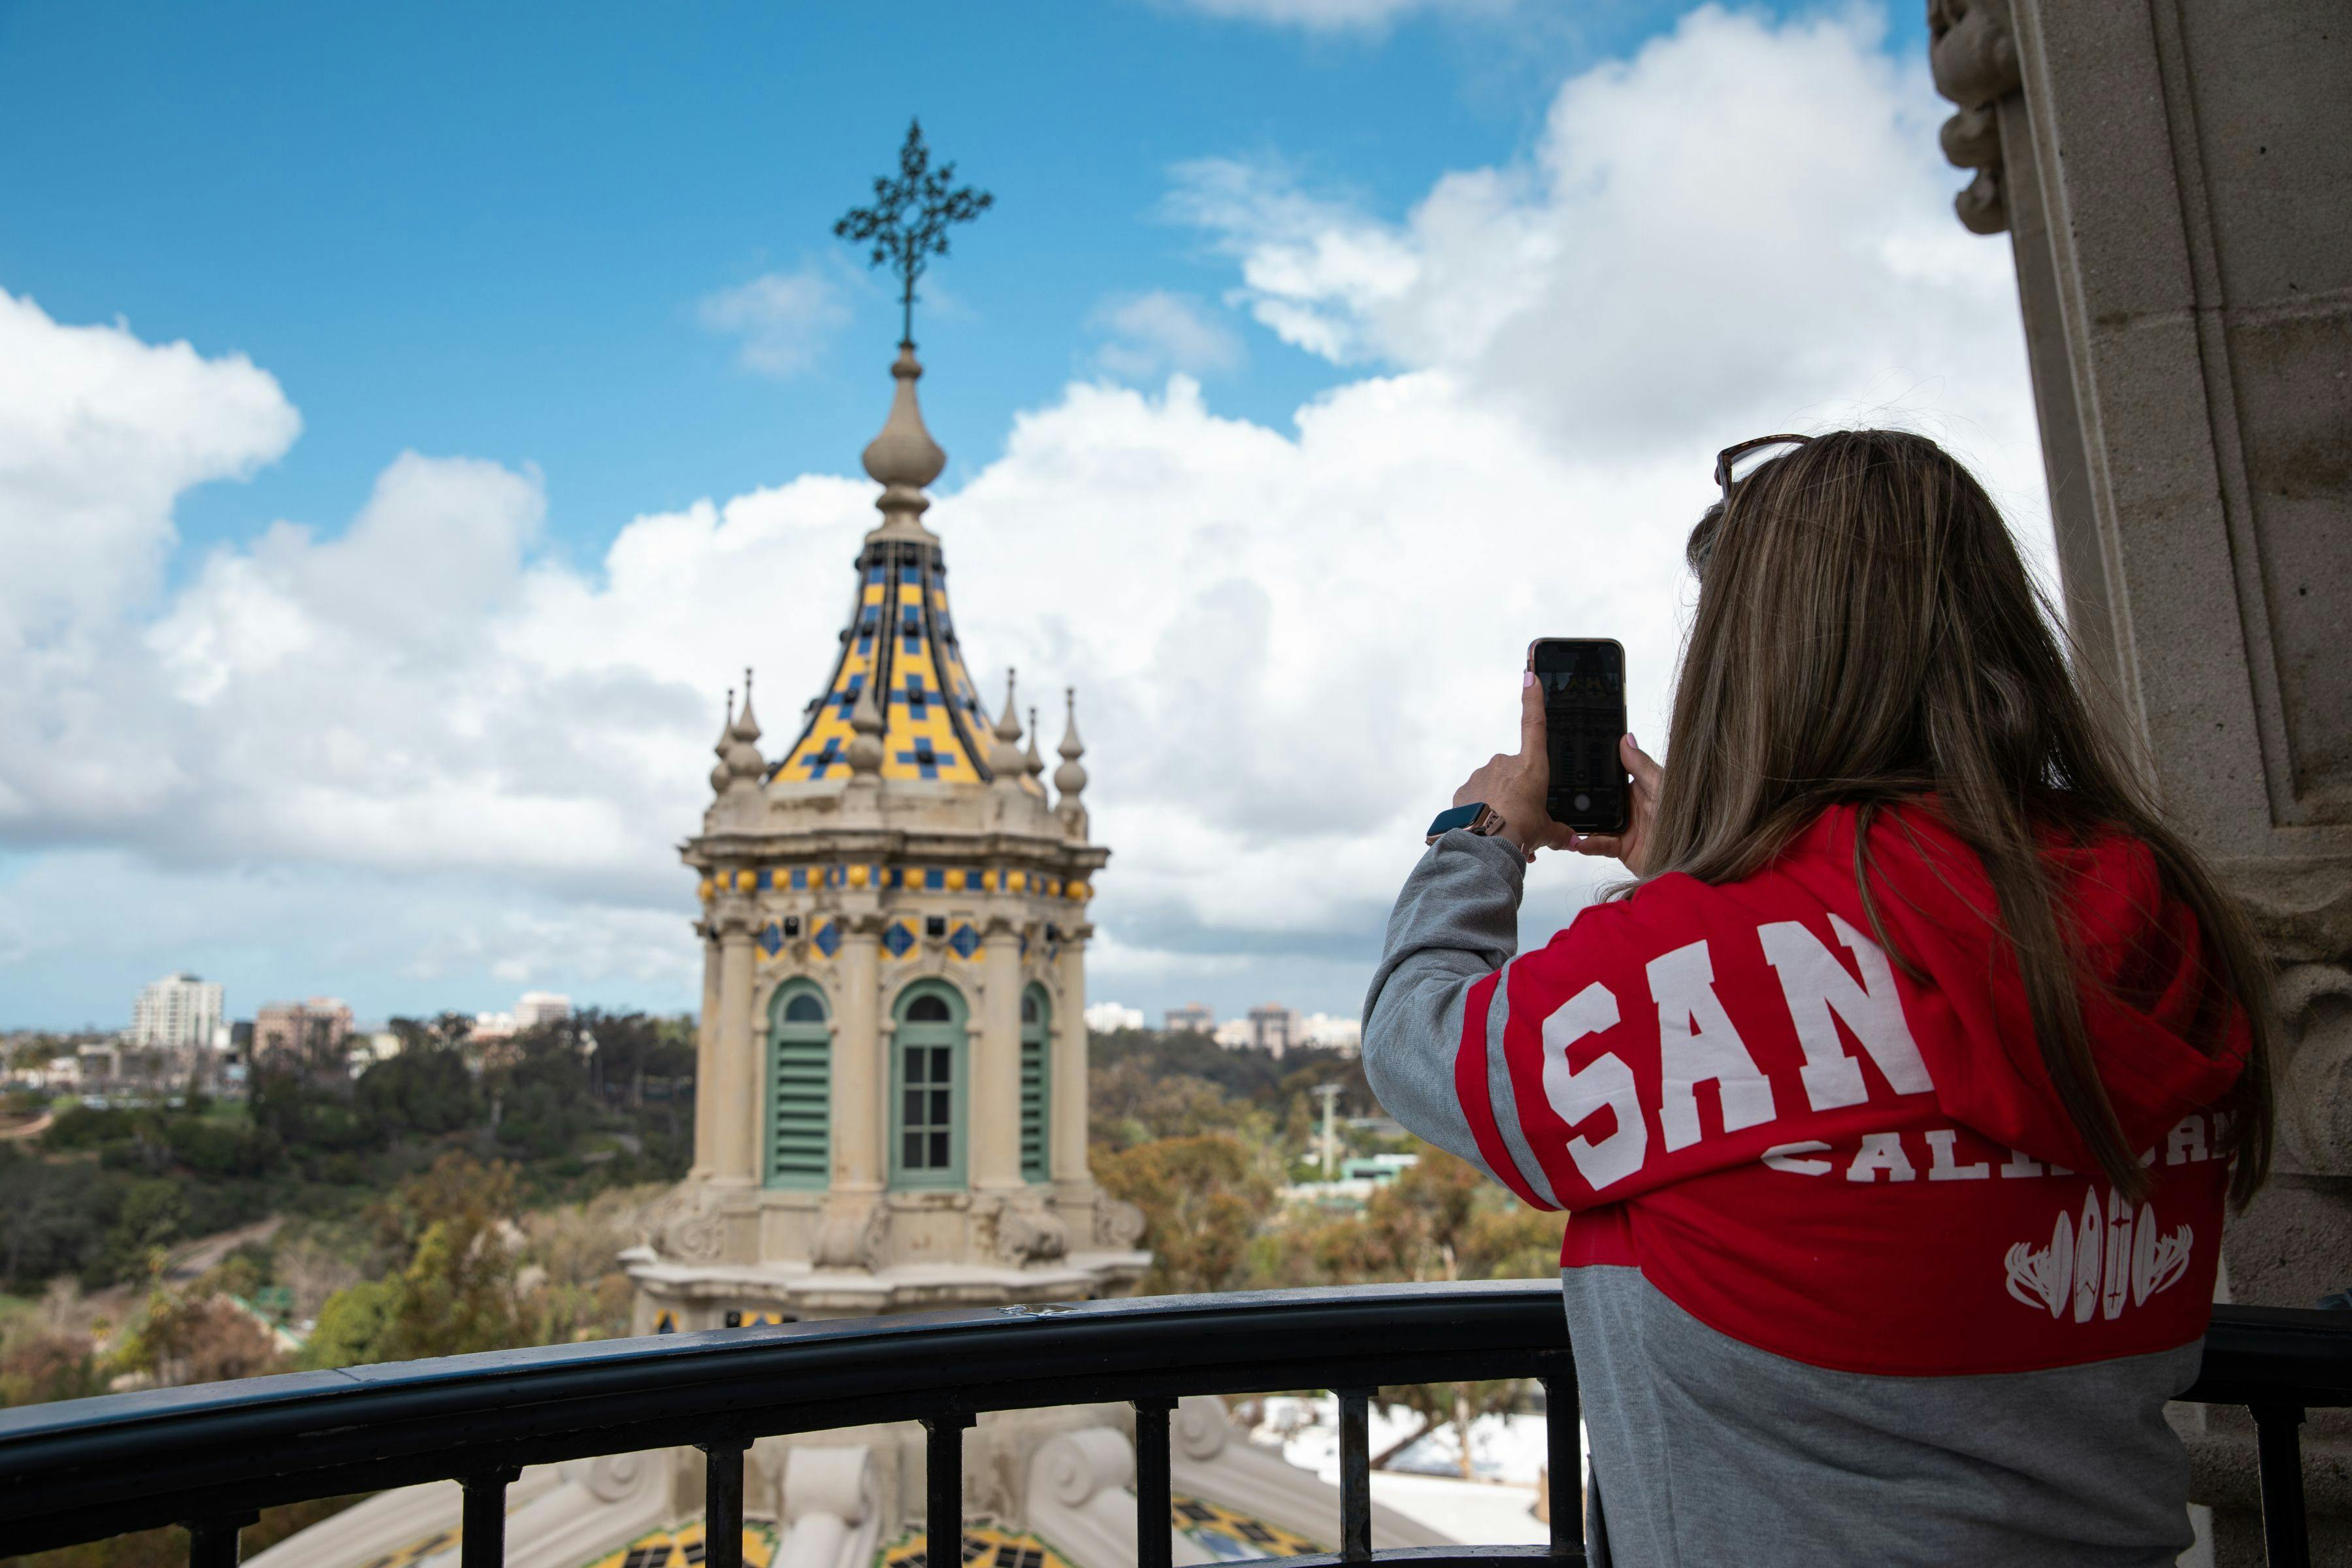 A person in a red and gray long sleeve shirt and long hair takes a picture on their smart phone of the California Building's tiled dome from the California Tower's viewing deck. Foliage and the San Diego skyline is in the background.